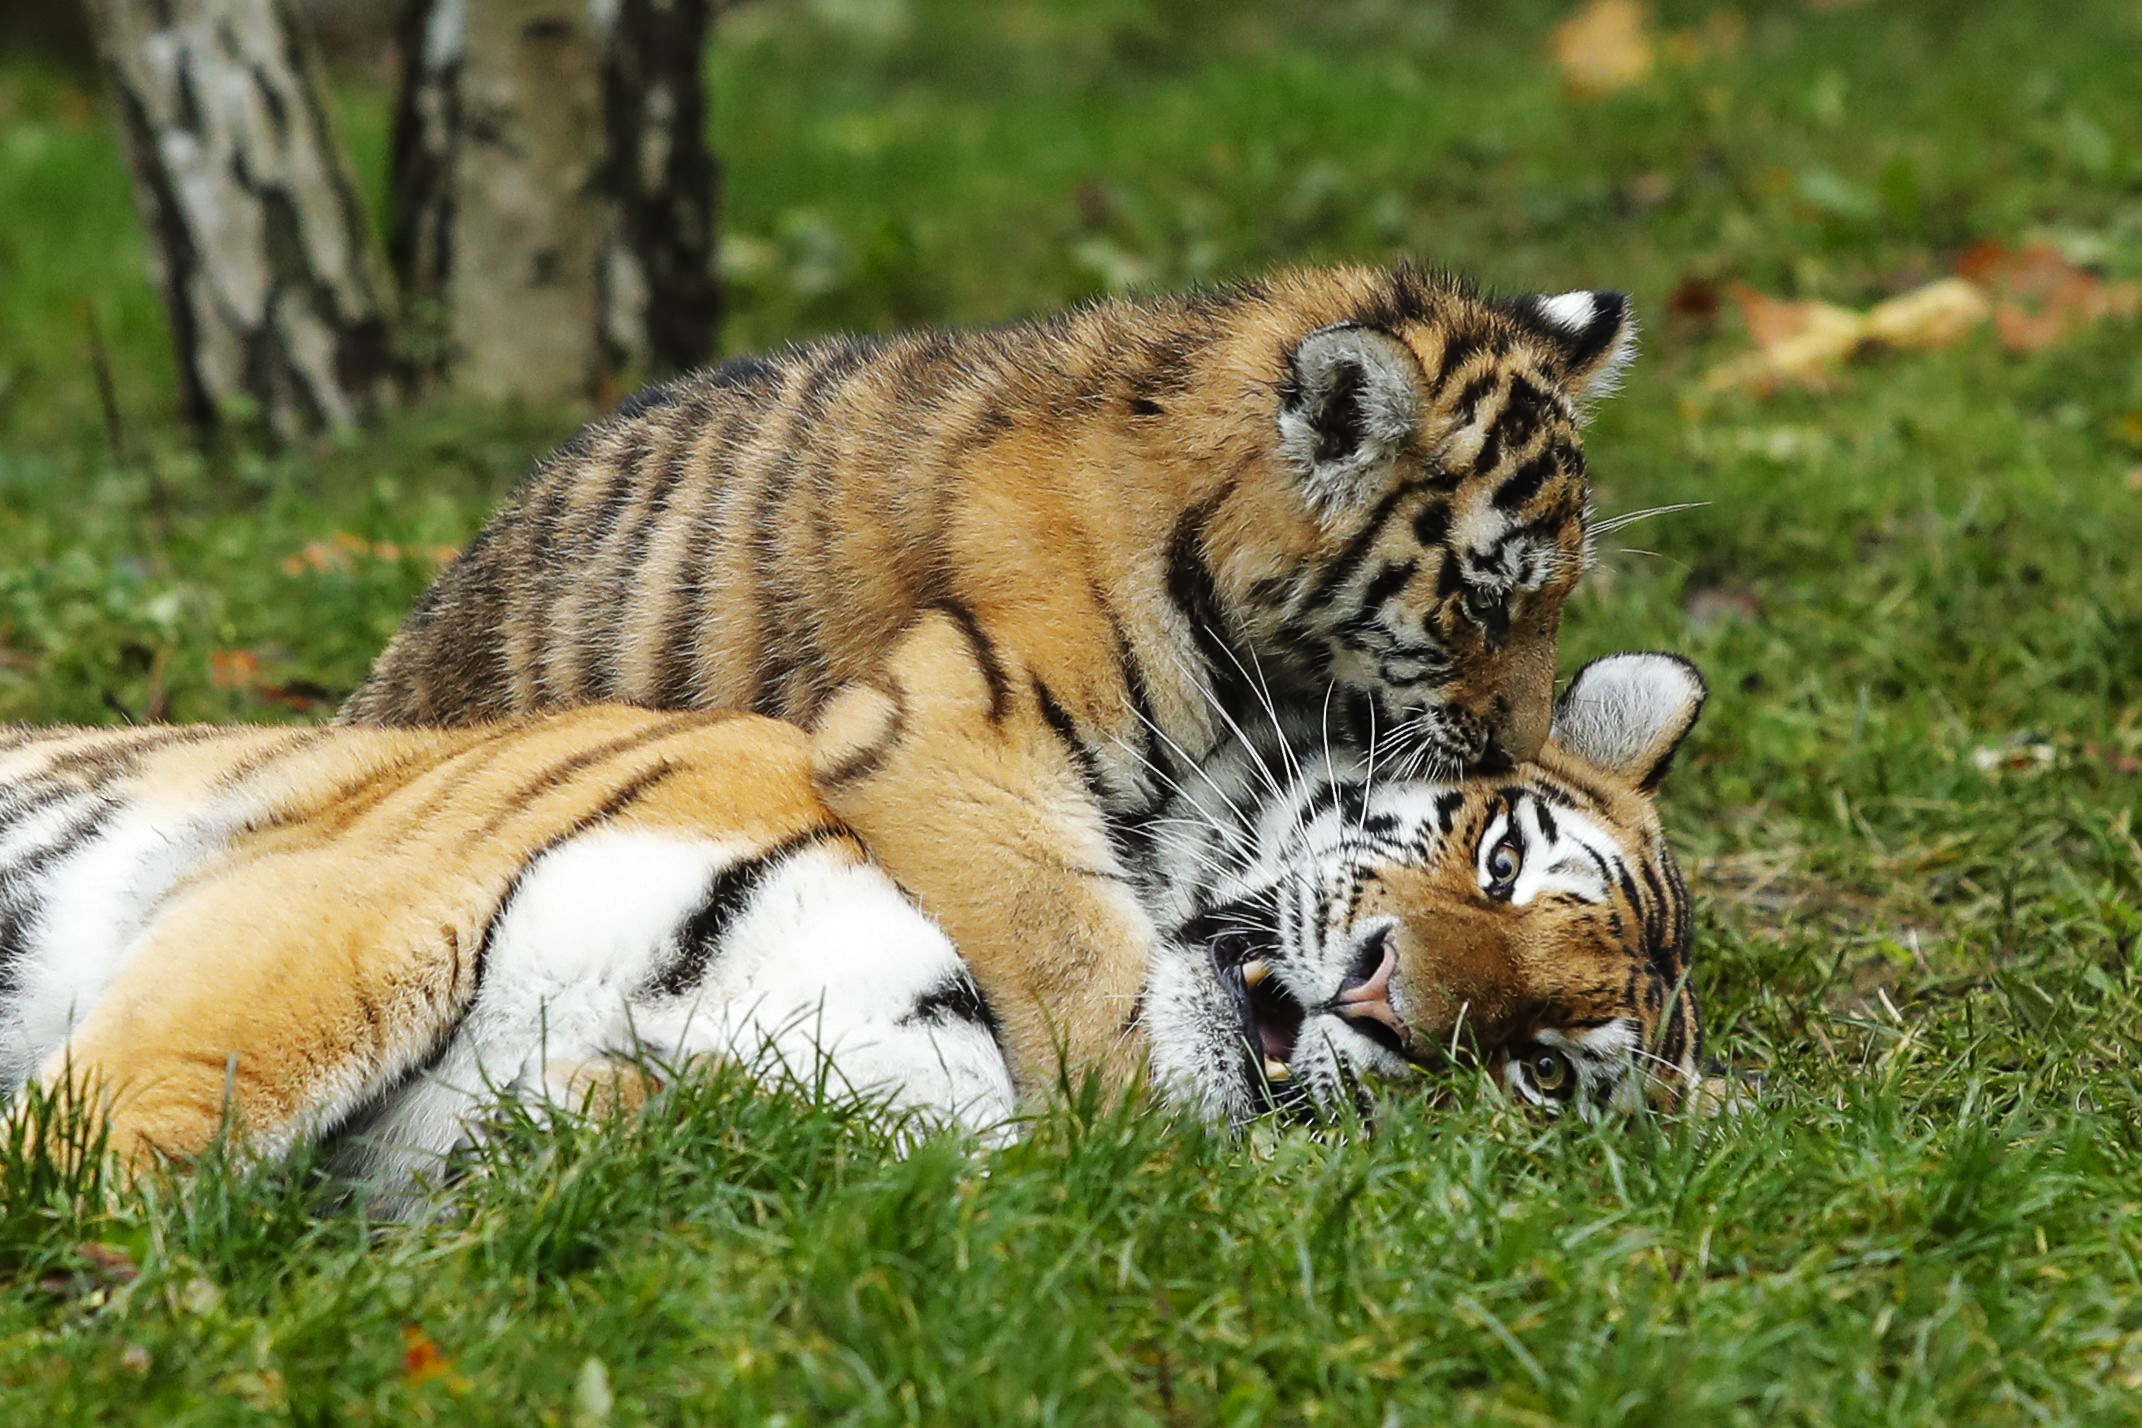 Tiger cubs play with their father at the Hagenbeck Zoo in Hamburg, Germany, Oct. 26, 2017.